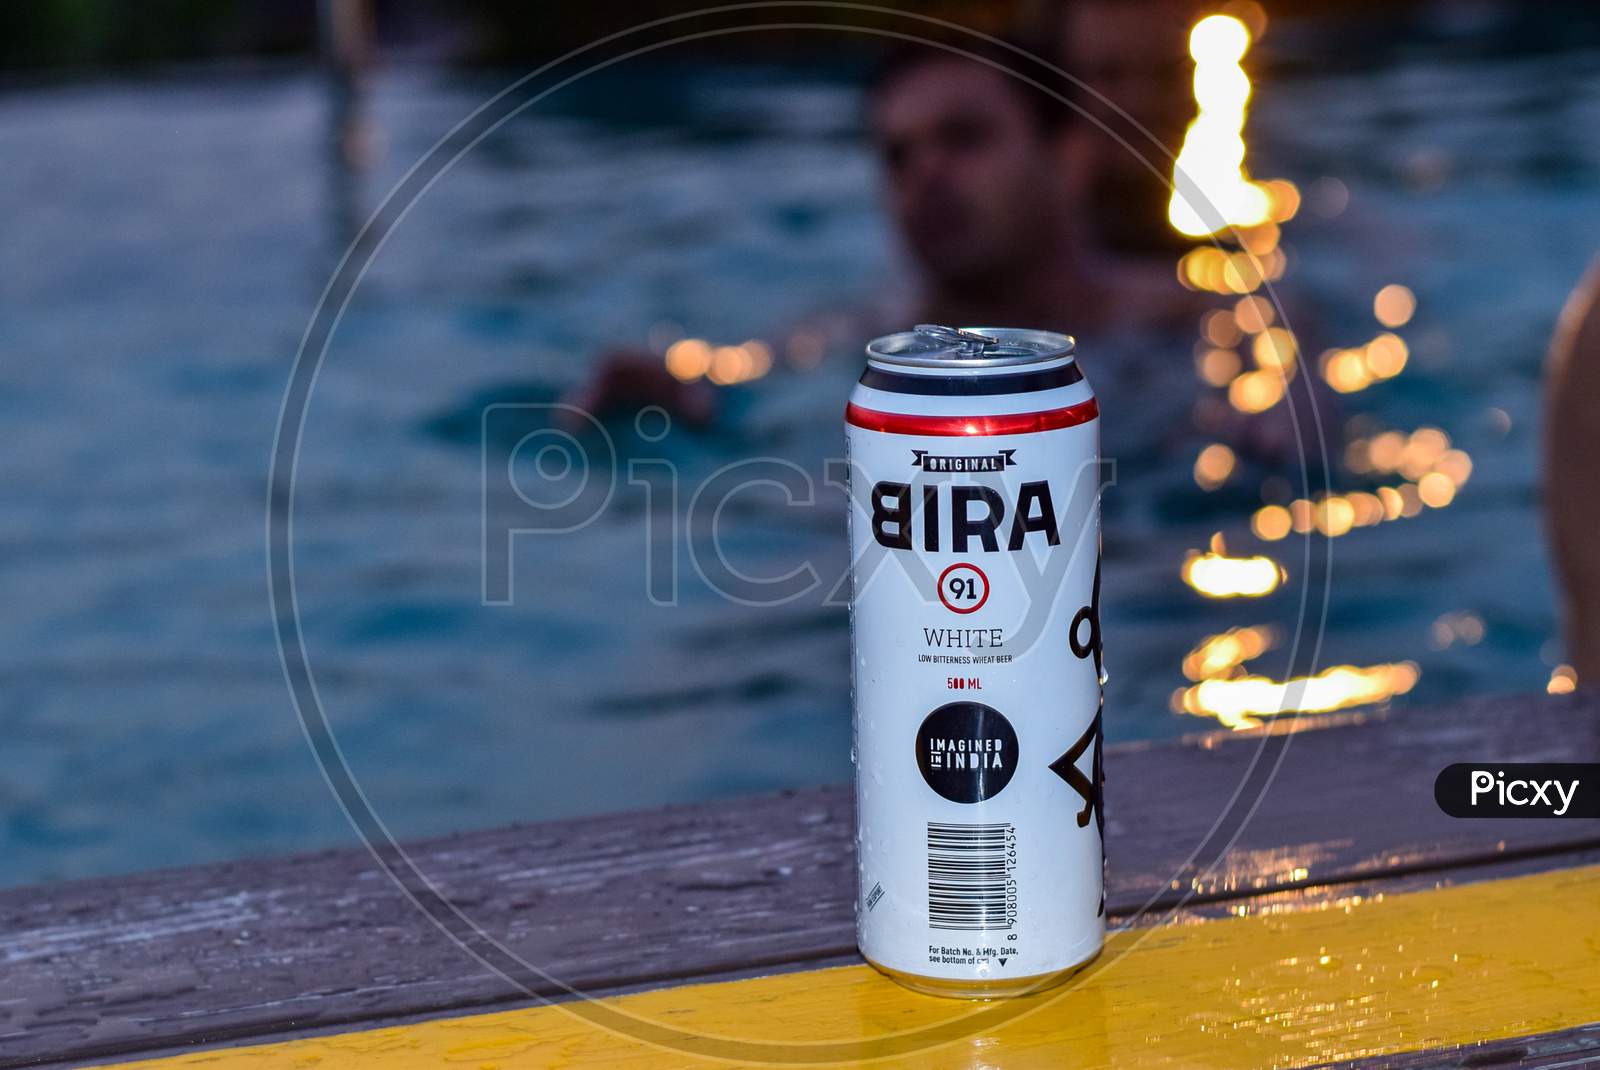 Manesar, 2018 : Bira Beer can kept near swimming pool in a resort. Bira is one of the upcoming beer brand in India manufactured by Bira91 B9 Beverages. It is available in various variants